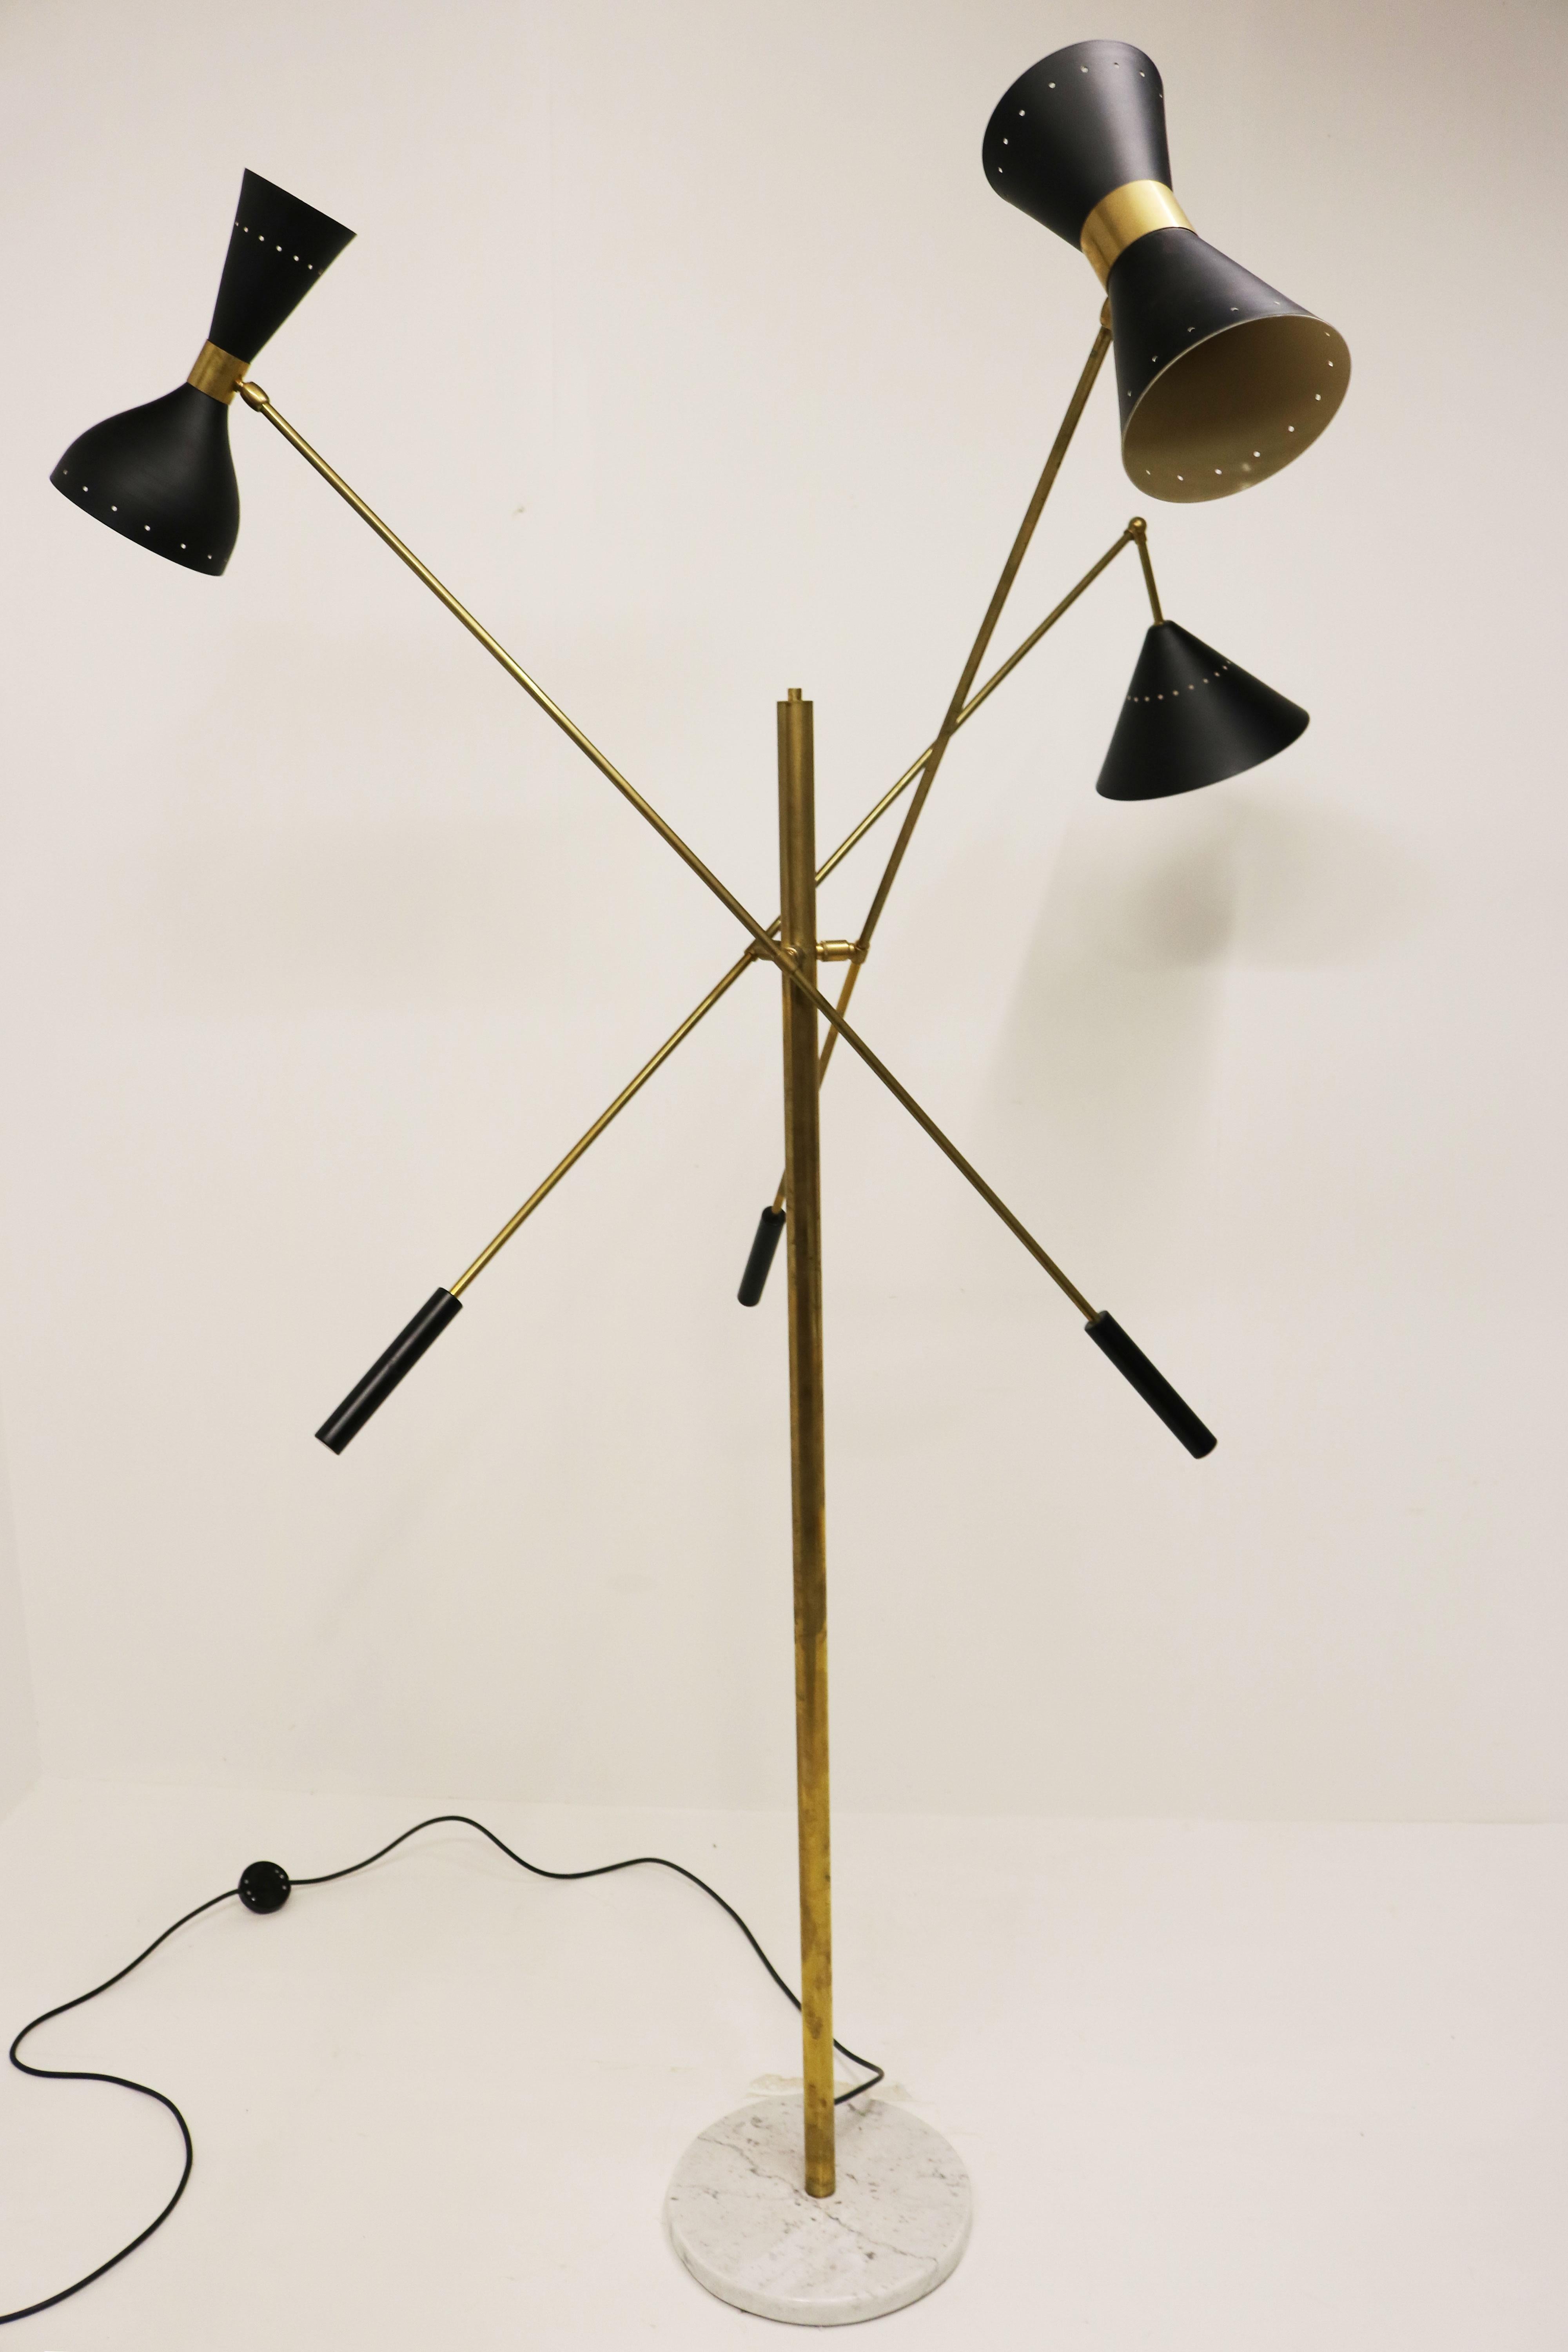 Stylish & timeless! This amazing Italian floor lamp in brass with 3 different black metal shades & Carrara marble base.
In the minimalist design style of Stilnovo 1950. 
The floor lamp has 5 light sockets divided over 3 adjustable arms. 
You can